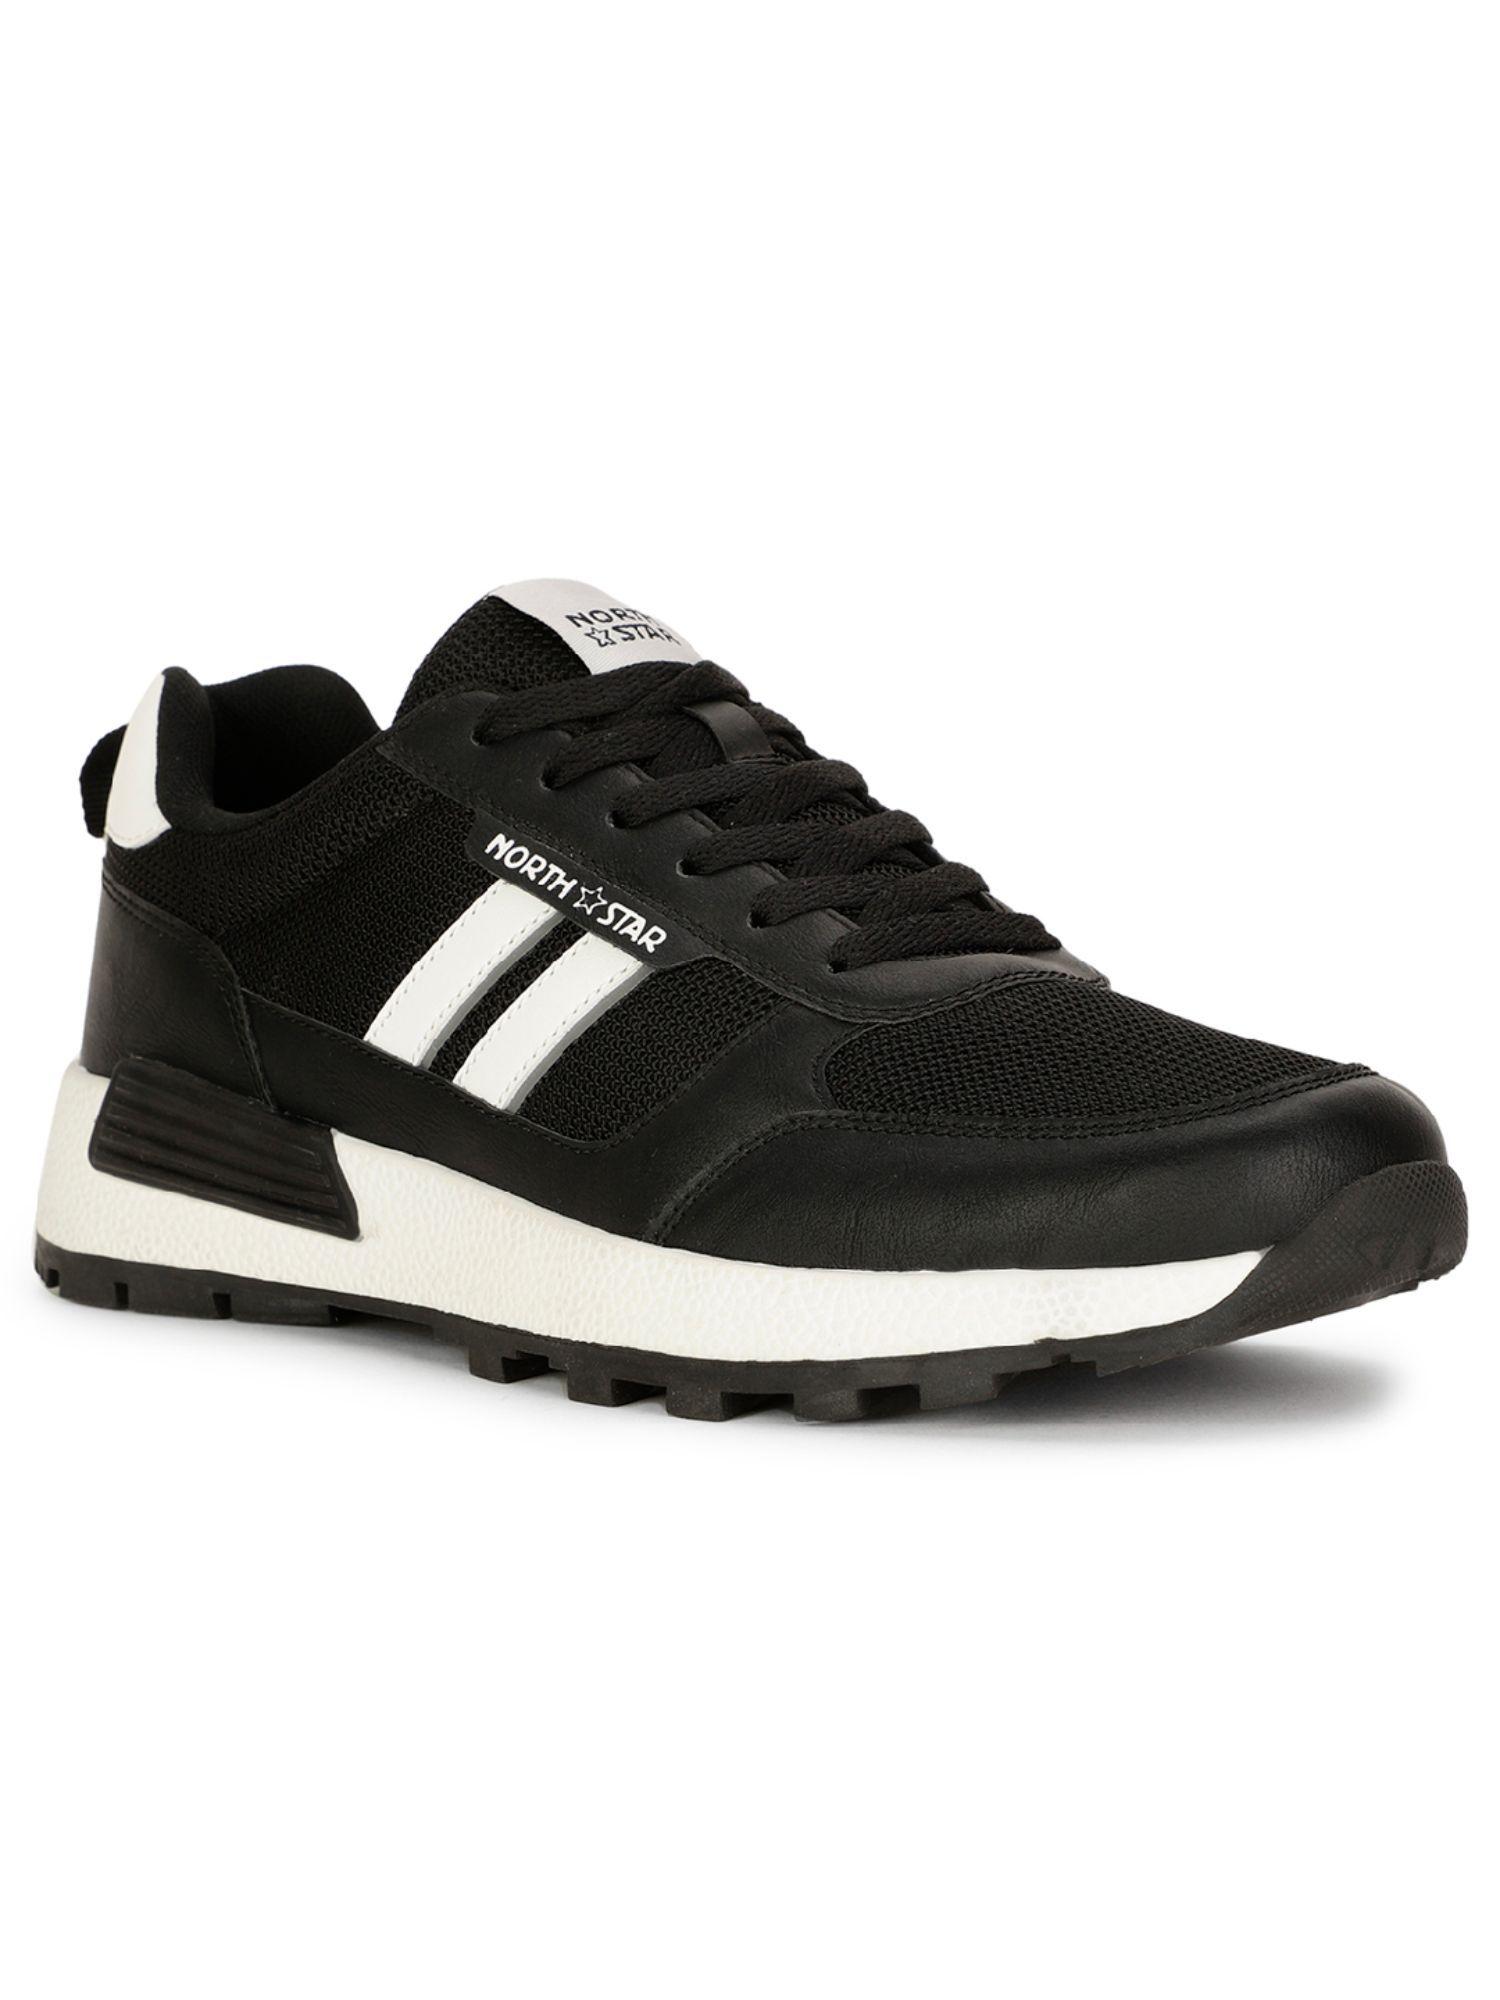 mens black lace-ups running shoes